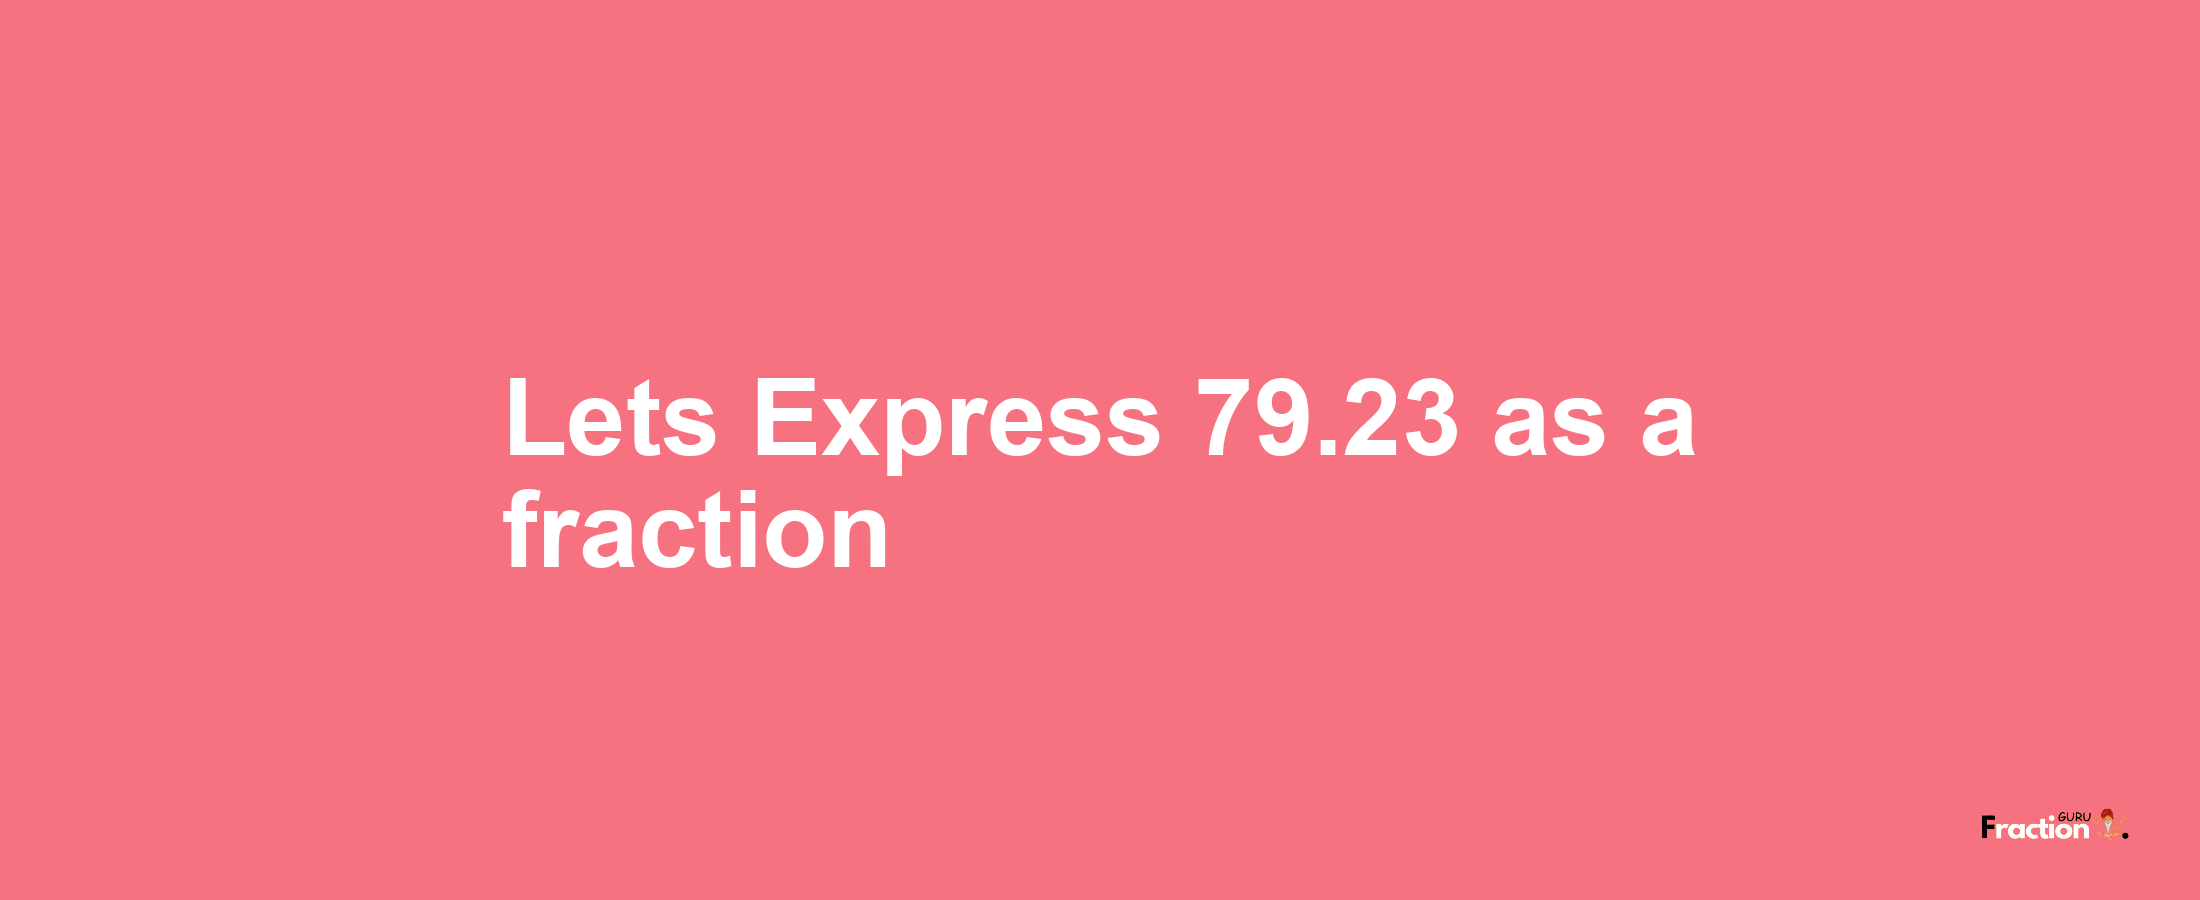 Lets Express 79.23 as afraction